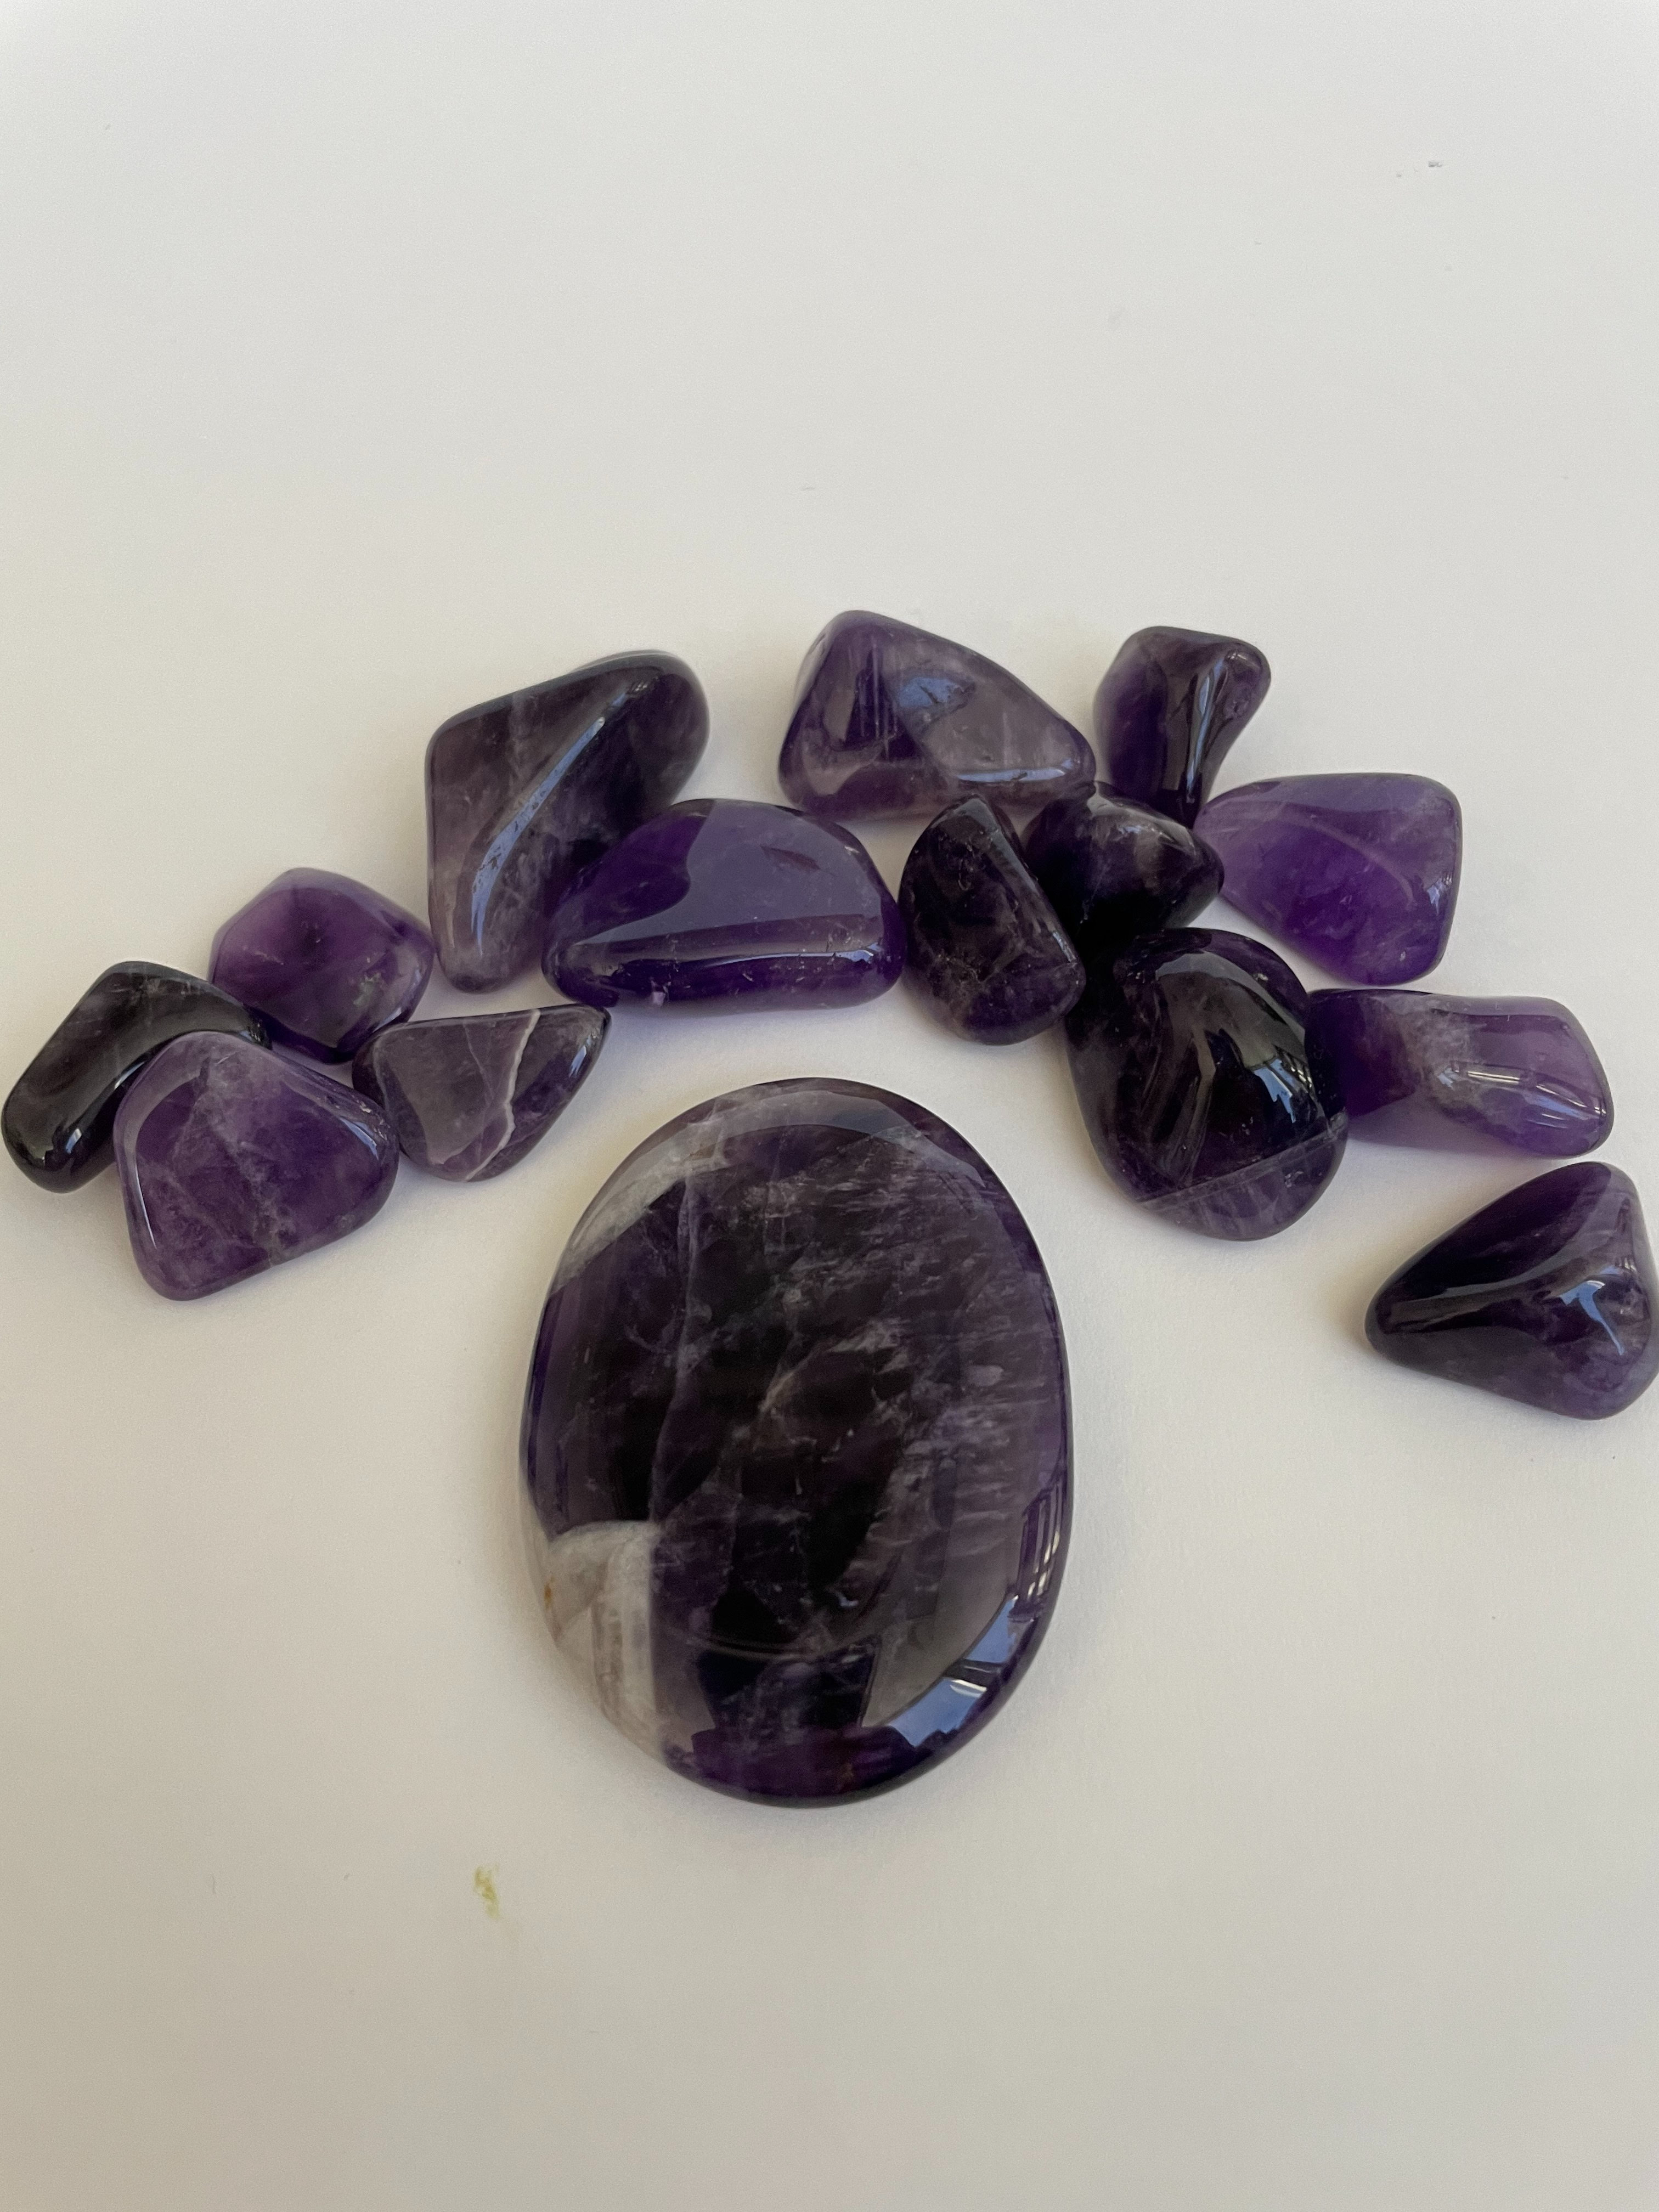 Chevron amethyst palm stone.  Beautiful amethyst palm stone can be used for meditation, healing, for your altar or as décor for any room in your home or office. Amethyst, one of the most spiritual gemstones, heals, cleanses & calms, allowing you to reach meditative & higher consciousness levels more easily. It also helps to dispel negative emotional states and more. Chevron amethyst is a combination of amethyst and white quartz and when you add the quartz you get additional qualities. 2" long. Cost is $12.